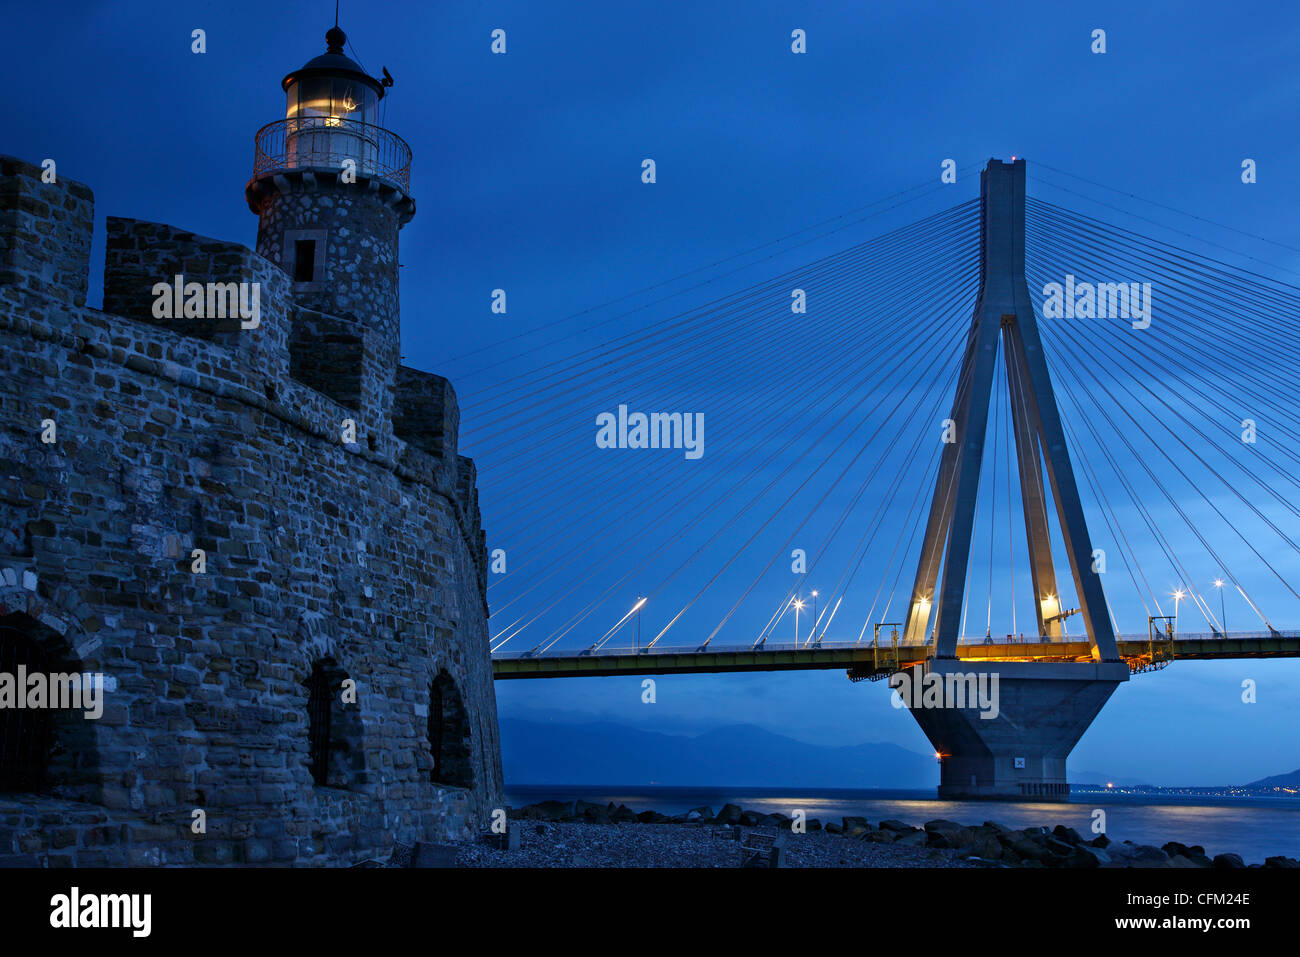 The Rion- Antirion cable bridge and the castle of Antirion with its lighthouse. Etoloakarnania, mainland Greece. Stock Photo